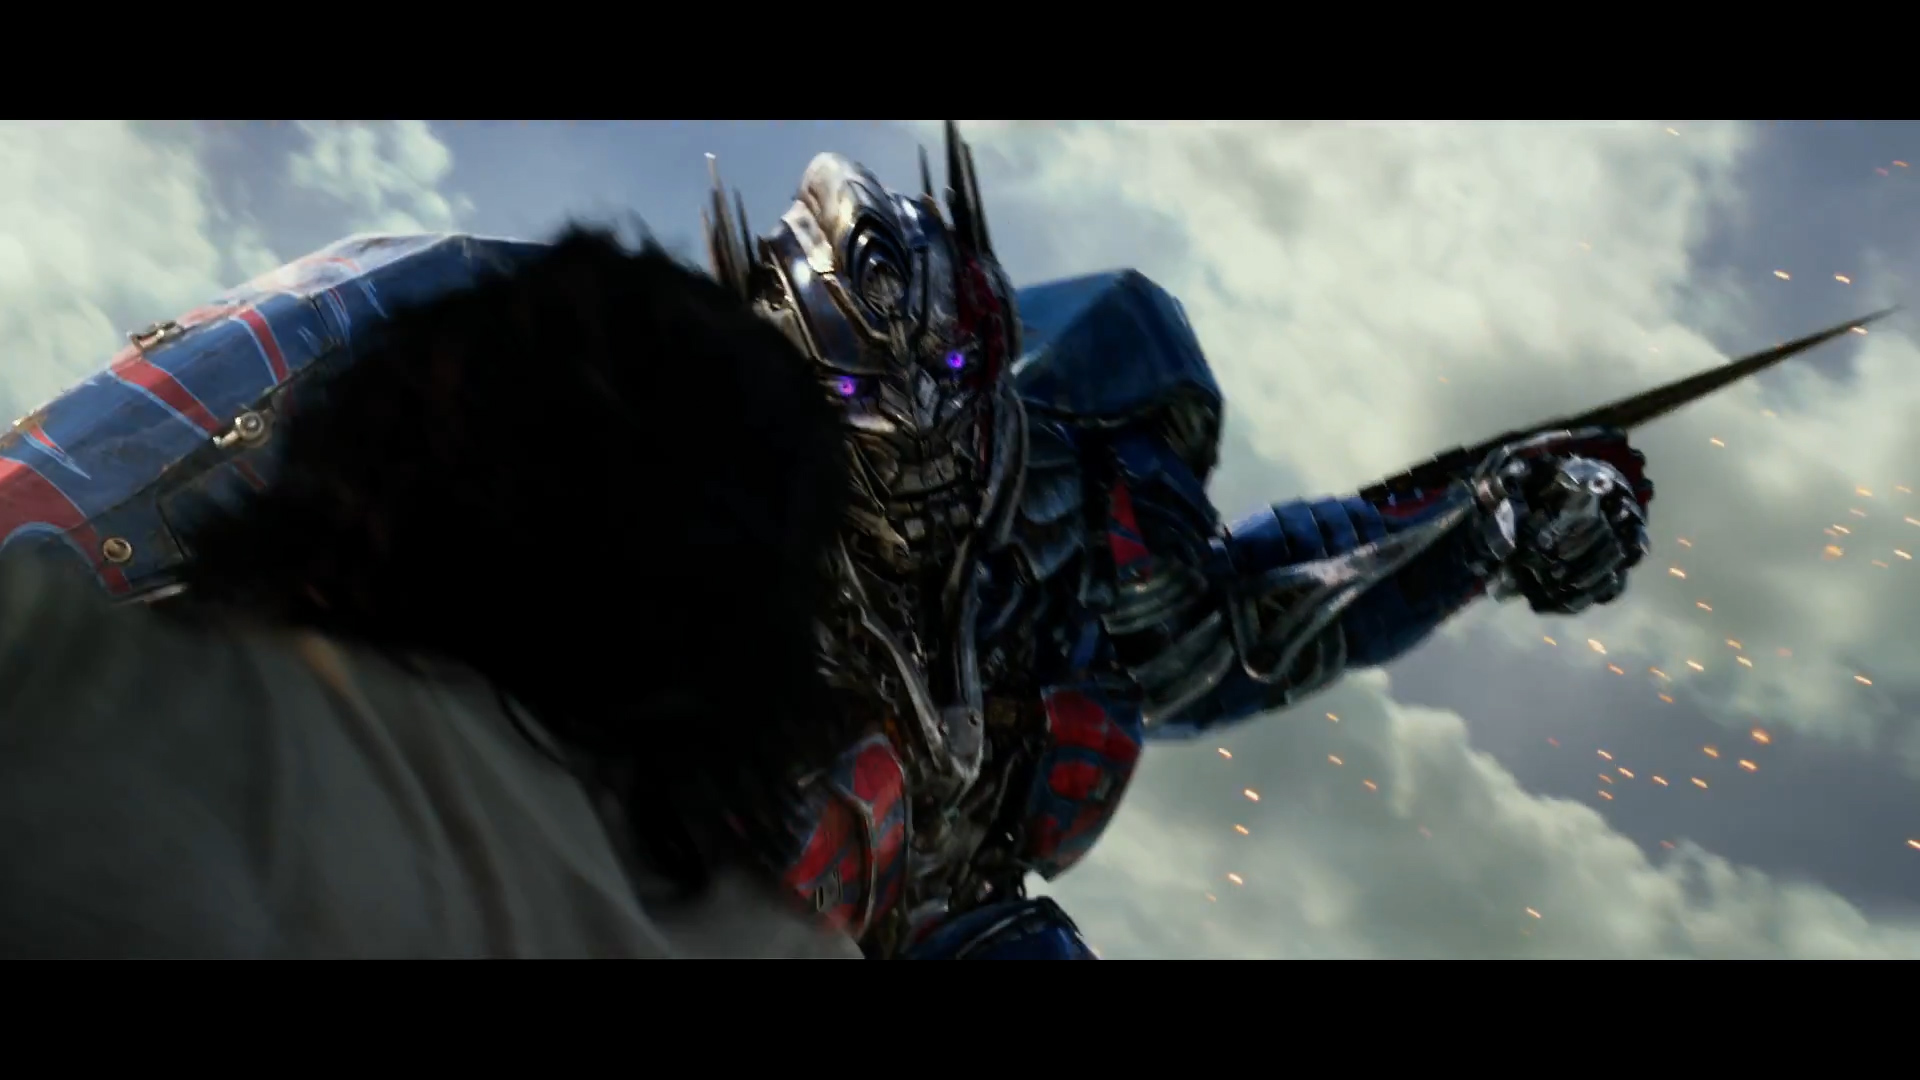 A Painful Shot-By-Shot Breakdown Of The Transformers: The Last Knight Trailer